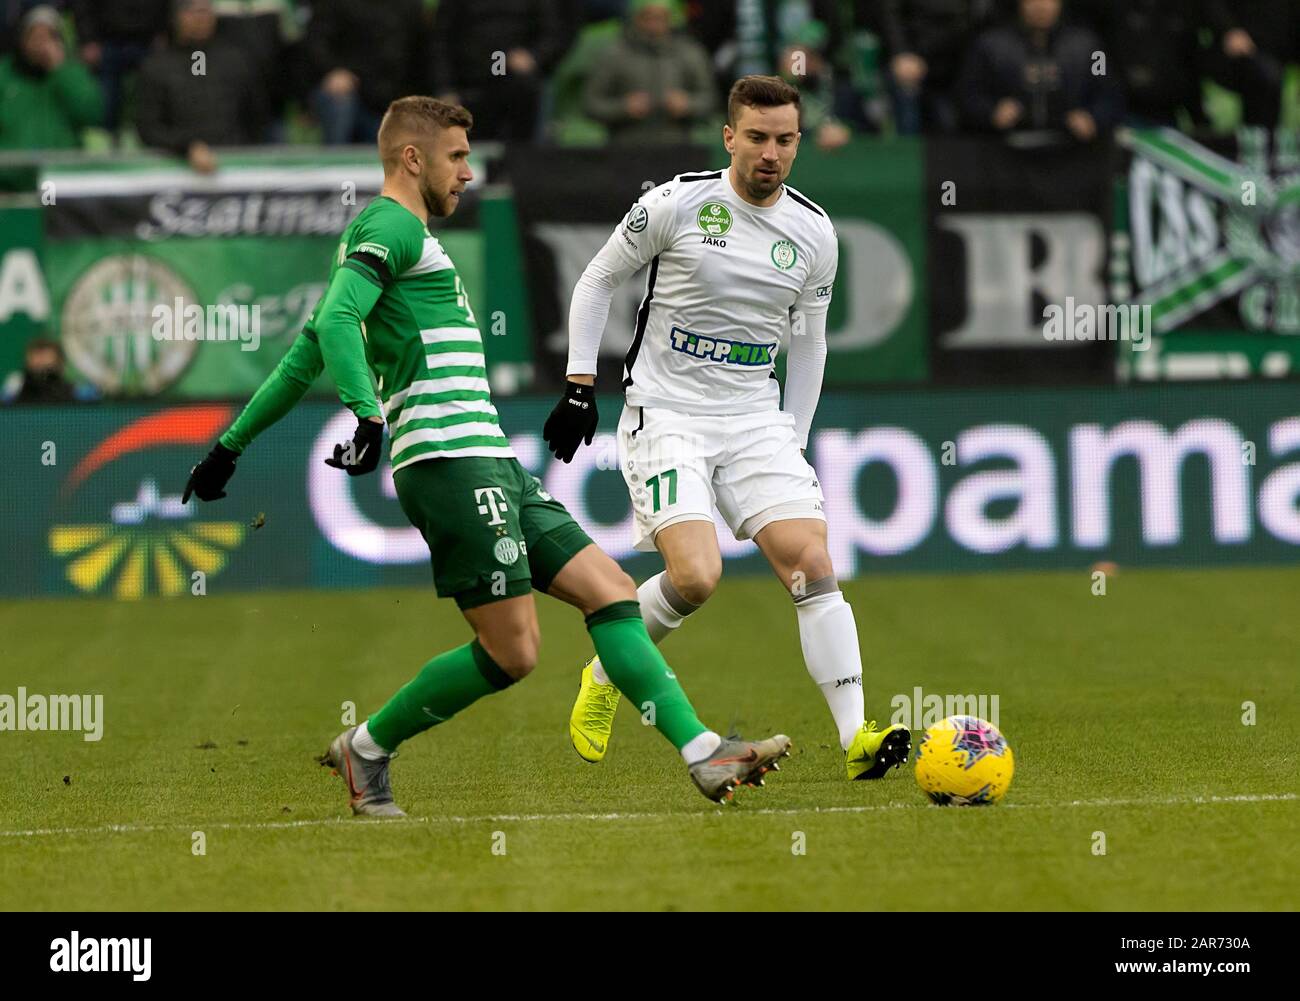 Eldar Civic of Ferencvarosi TC runs with the ball during the